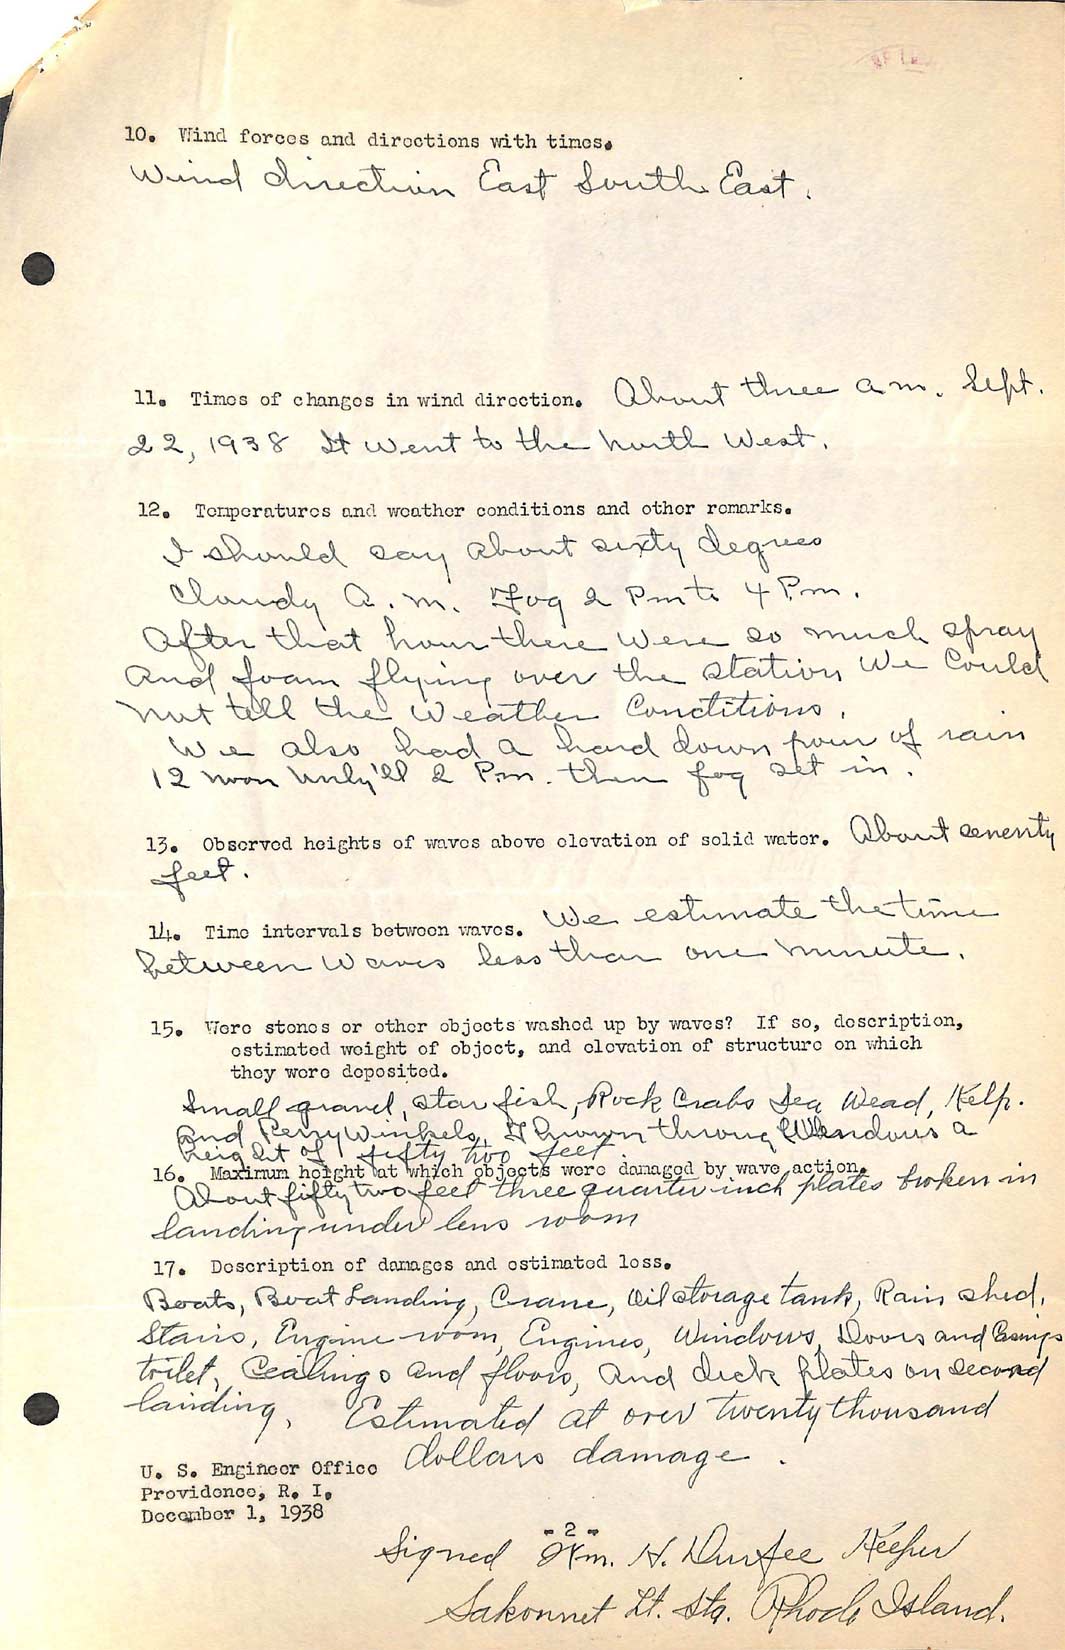 A questionnaire regarding the Effects of hurricane of September 21, 1938